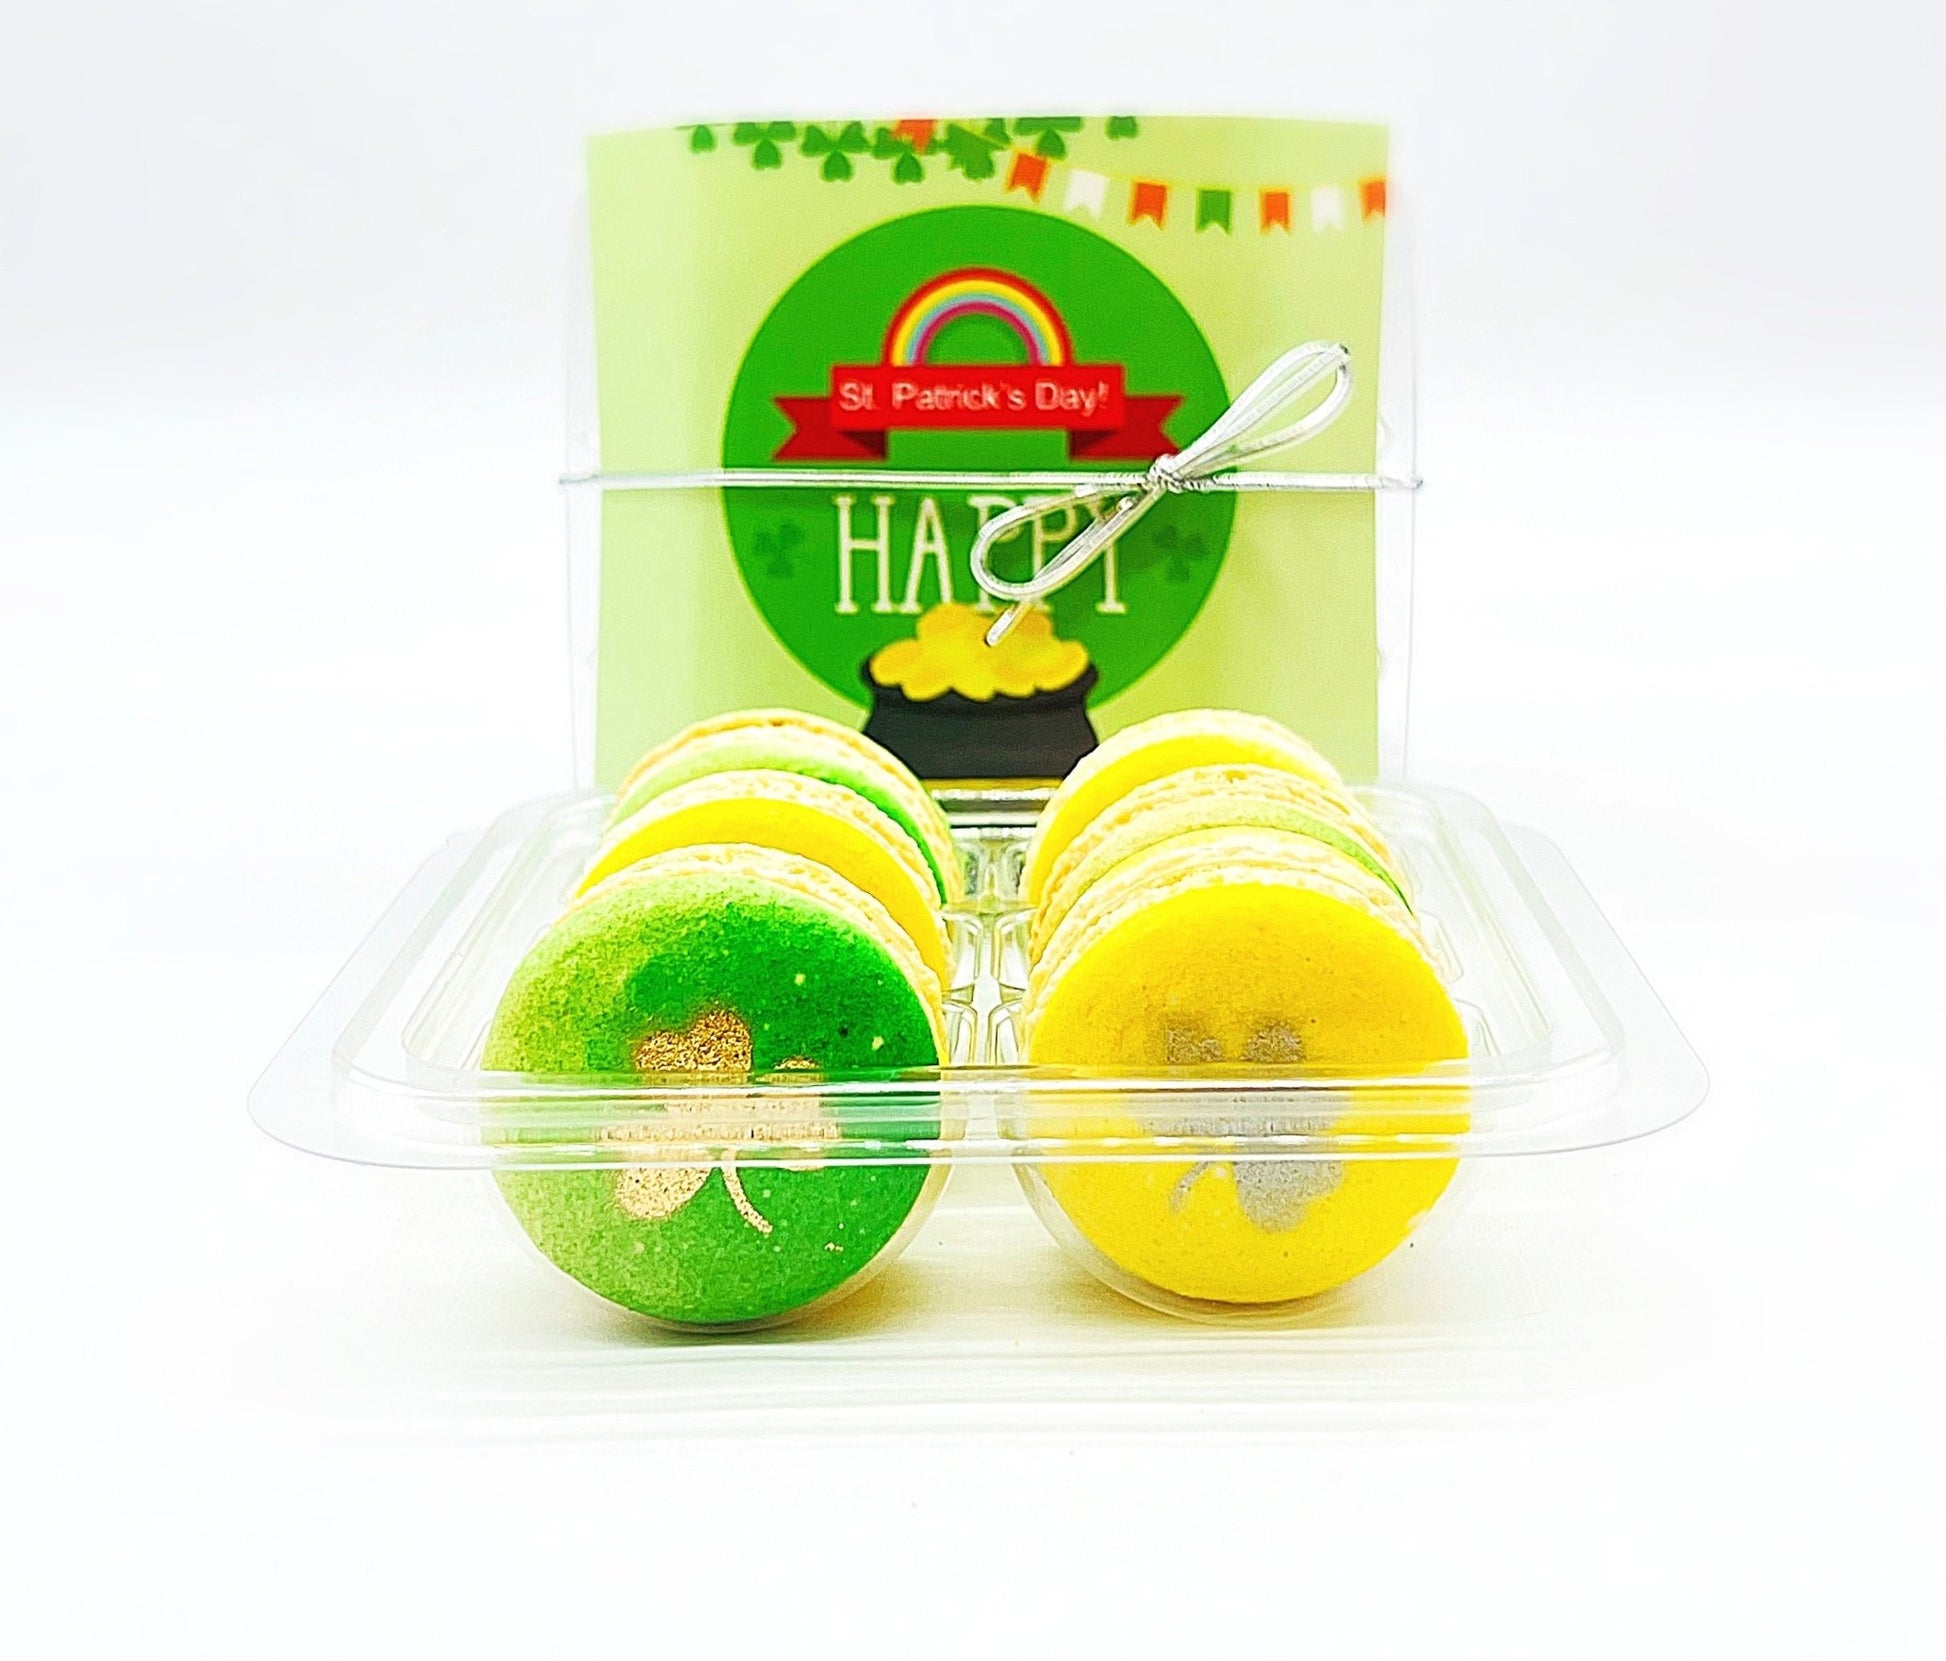 Gold and Silver Shamrock French Macaron Set | Perfect for upcoming St. Patrick's Day Celebration - Macaron Centrale6 Pack